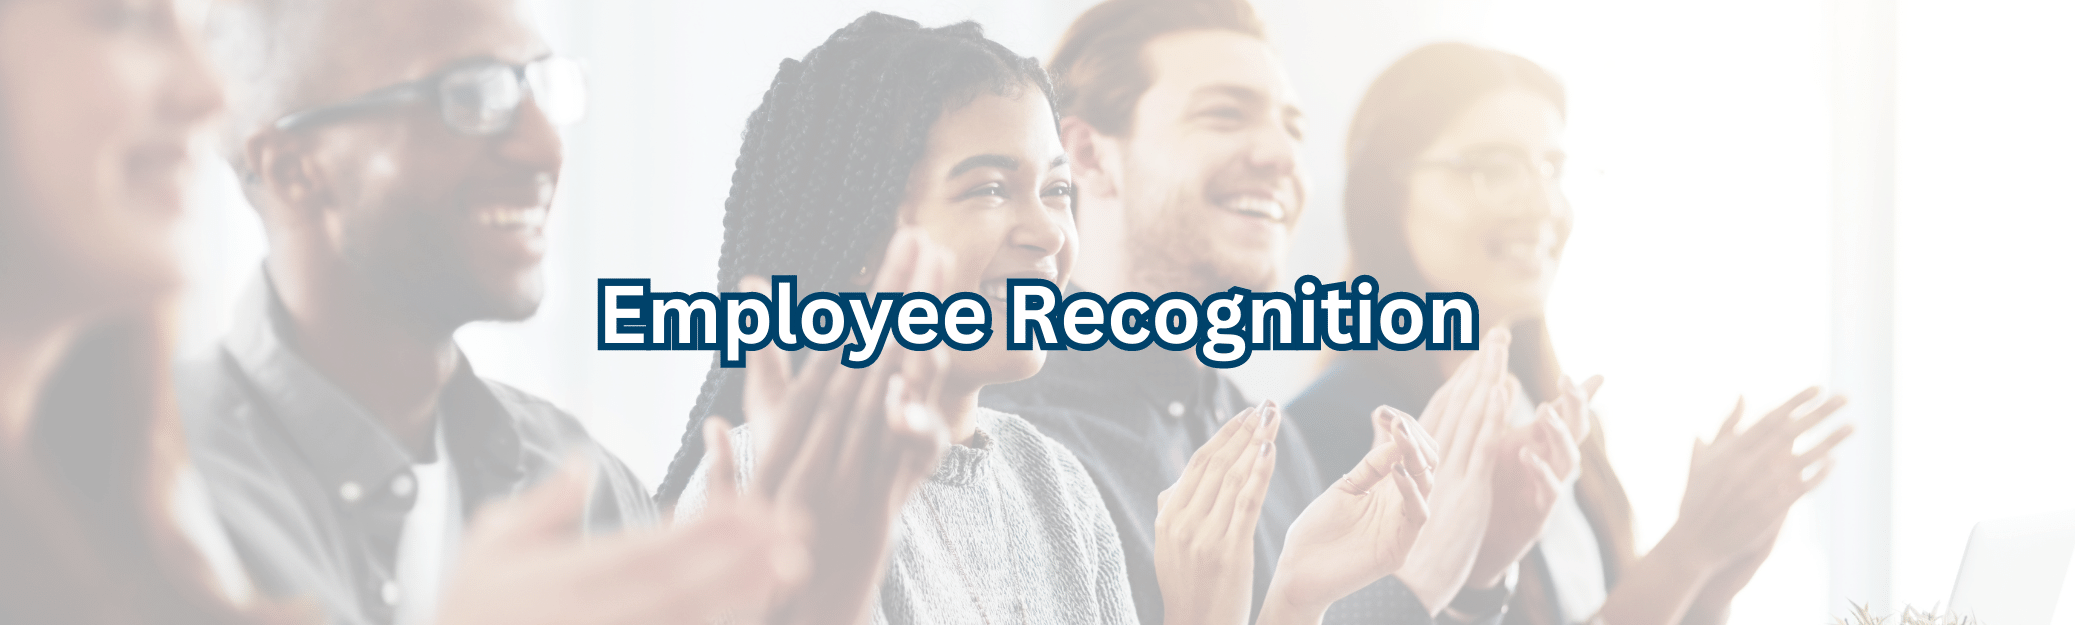 Employee recognition banner